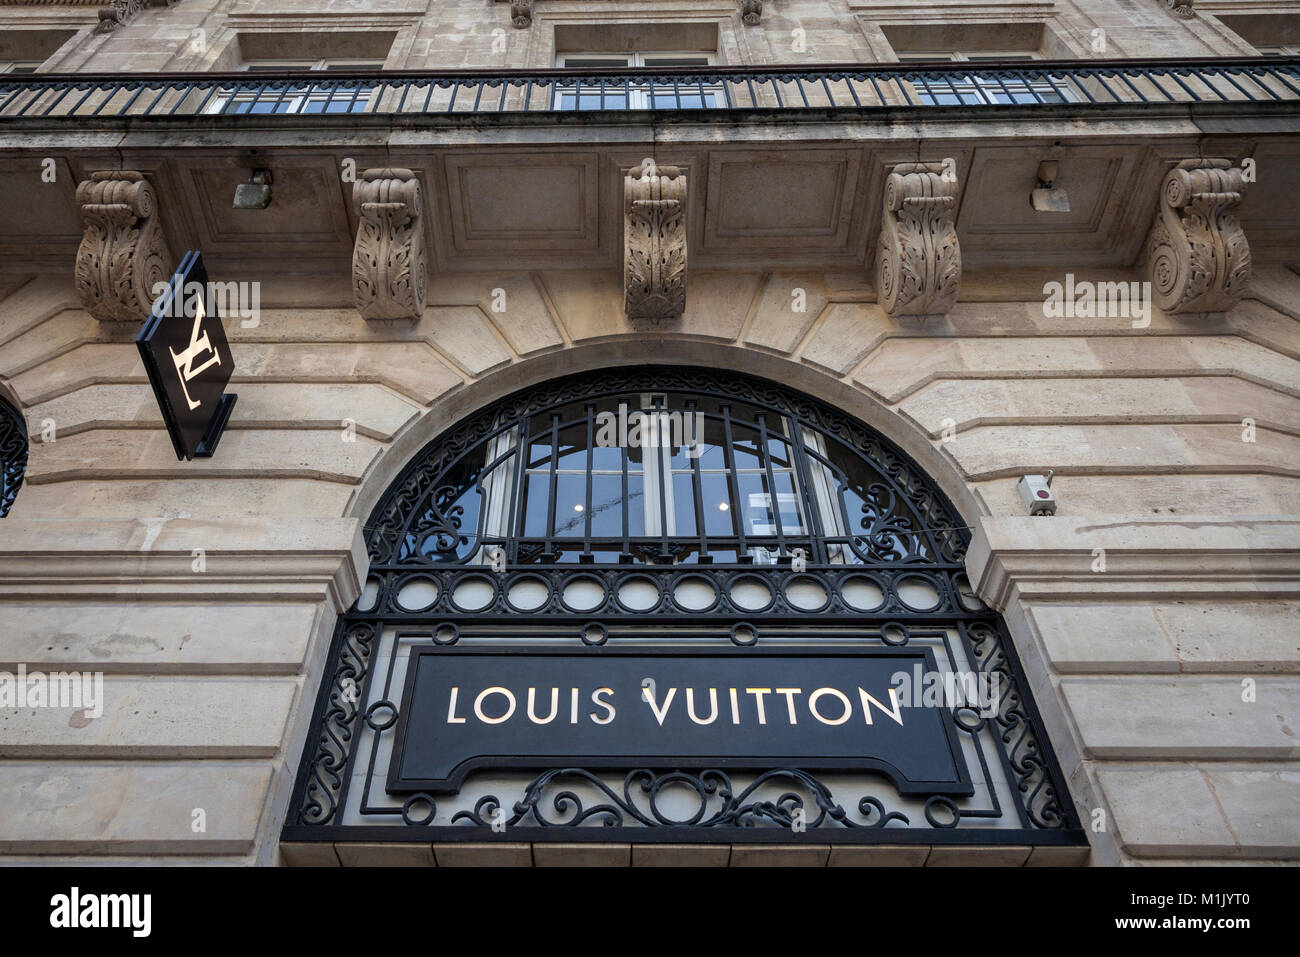 Louis Vuitton Stock Photos and Images - 123RF